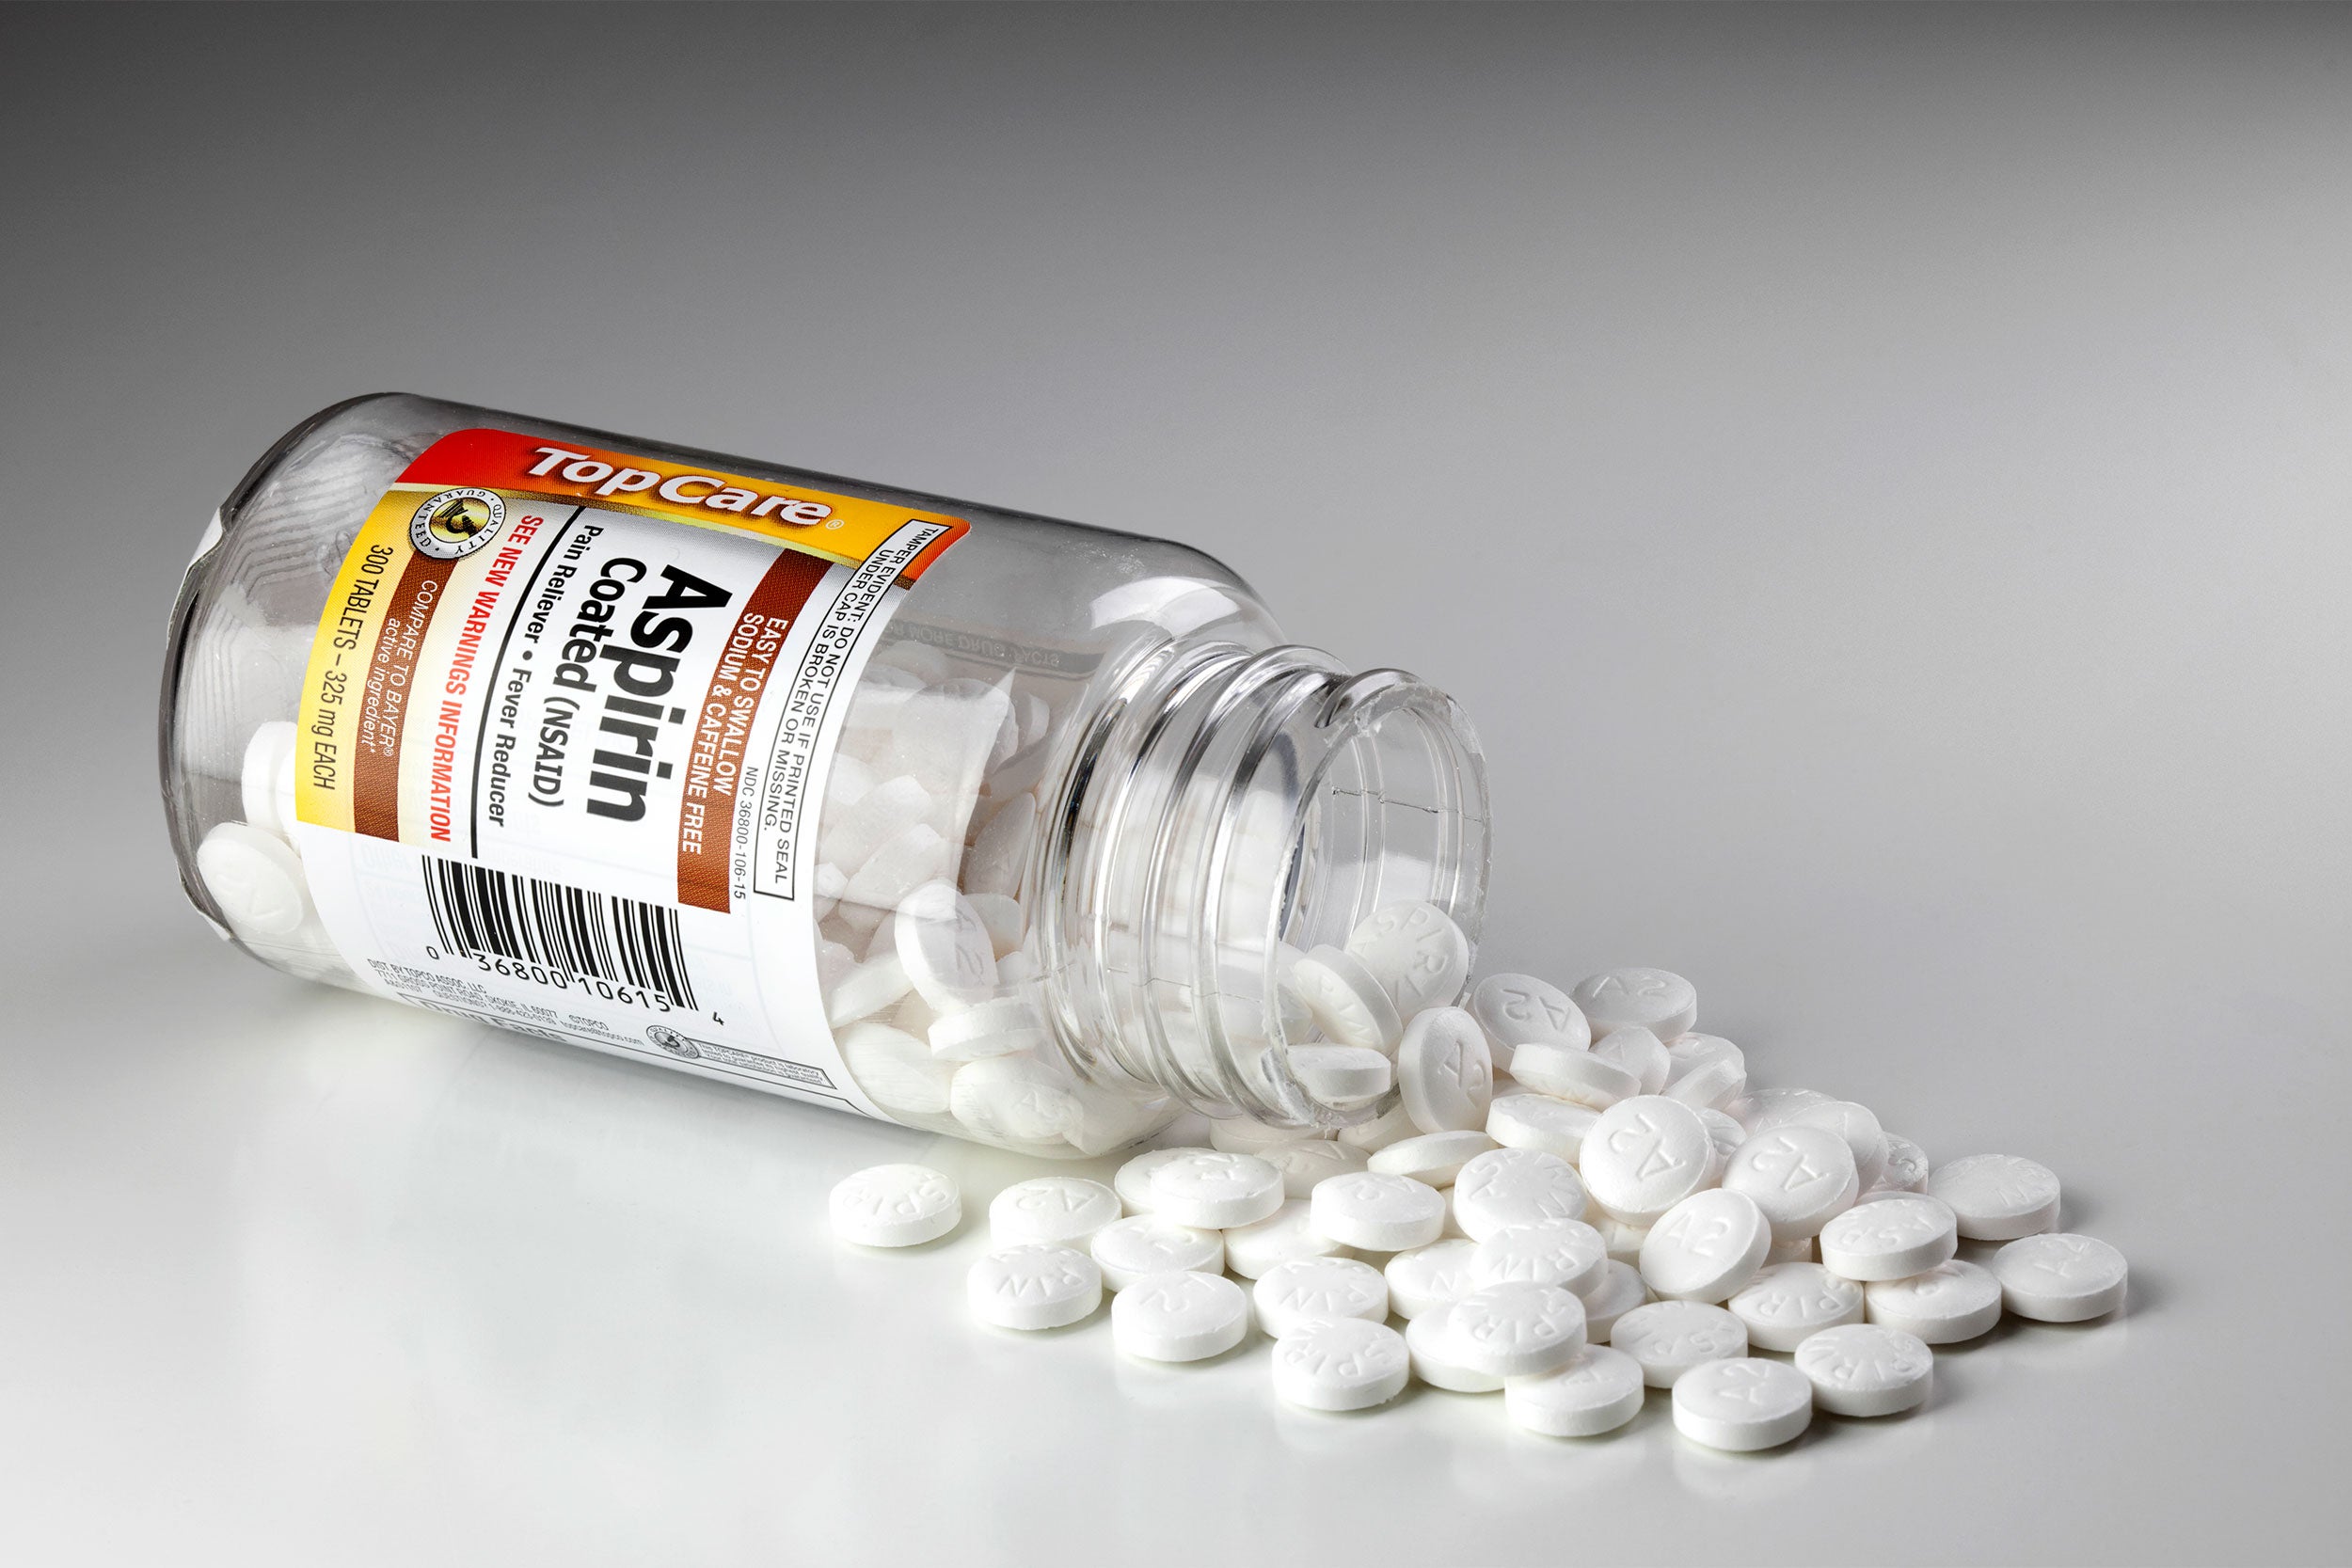 Aspirin Reduces Liver Fat in Clinical Trial of the Most Common Cause of Chronic Liver Disease